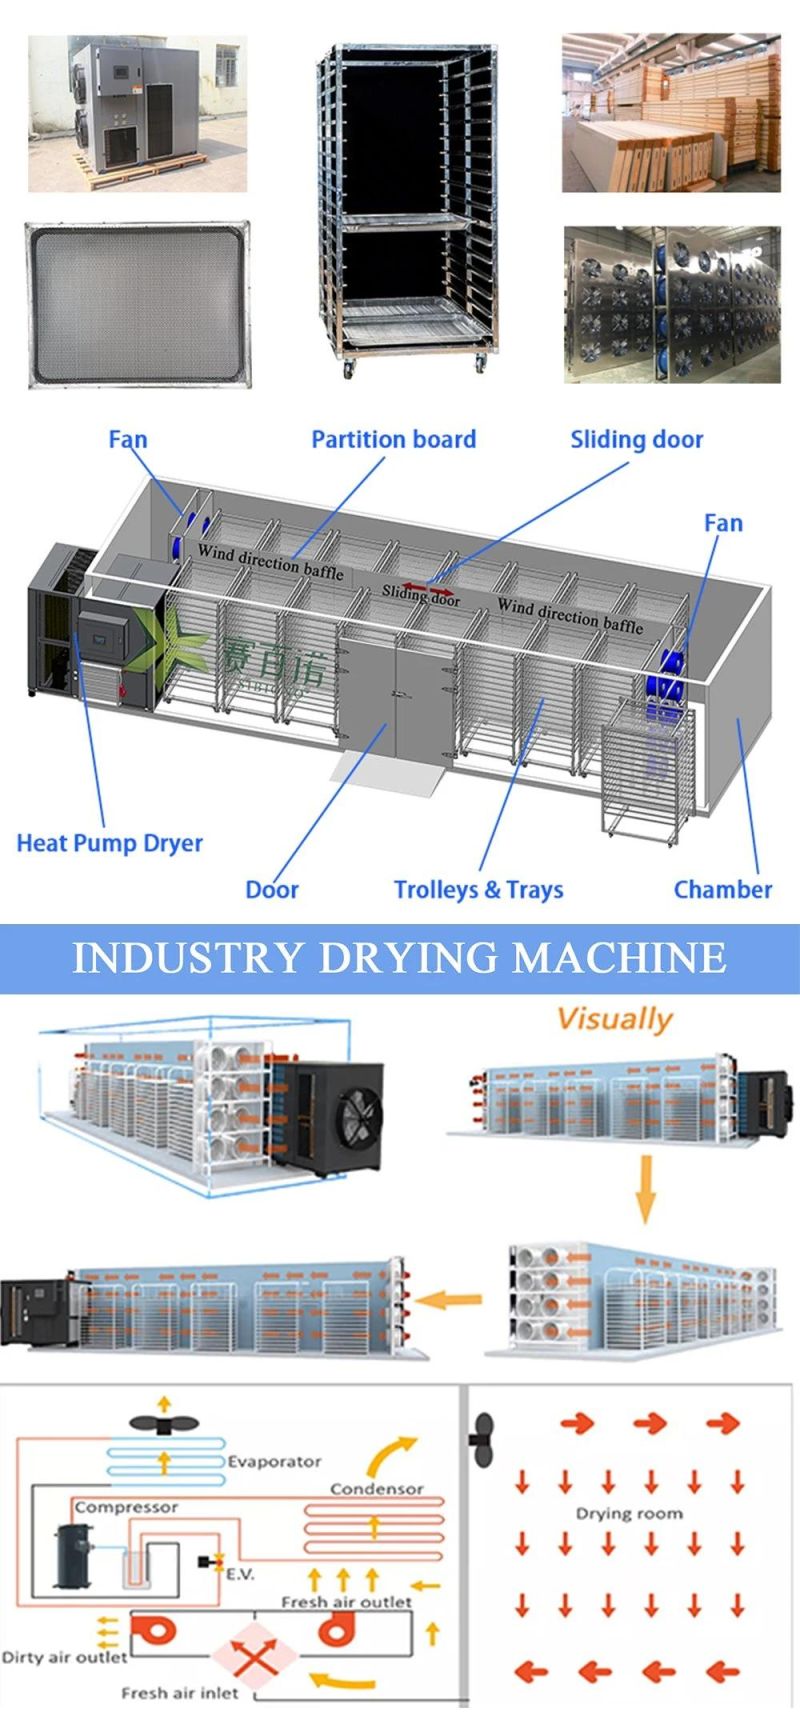 Hot Sale Ultra-High Capacity Heat Pump Dryer for Dehydrating Fruit,Vegetable, Fish,Spice,Noodles [Commercial Drying Machine, Drying Equipment, Dehydrator, Tray]